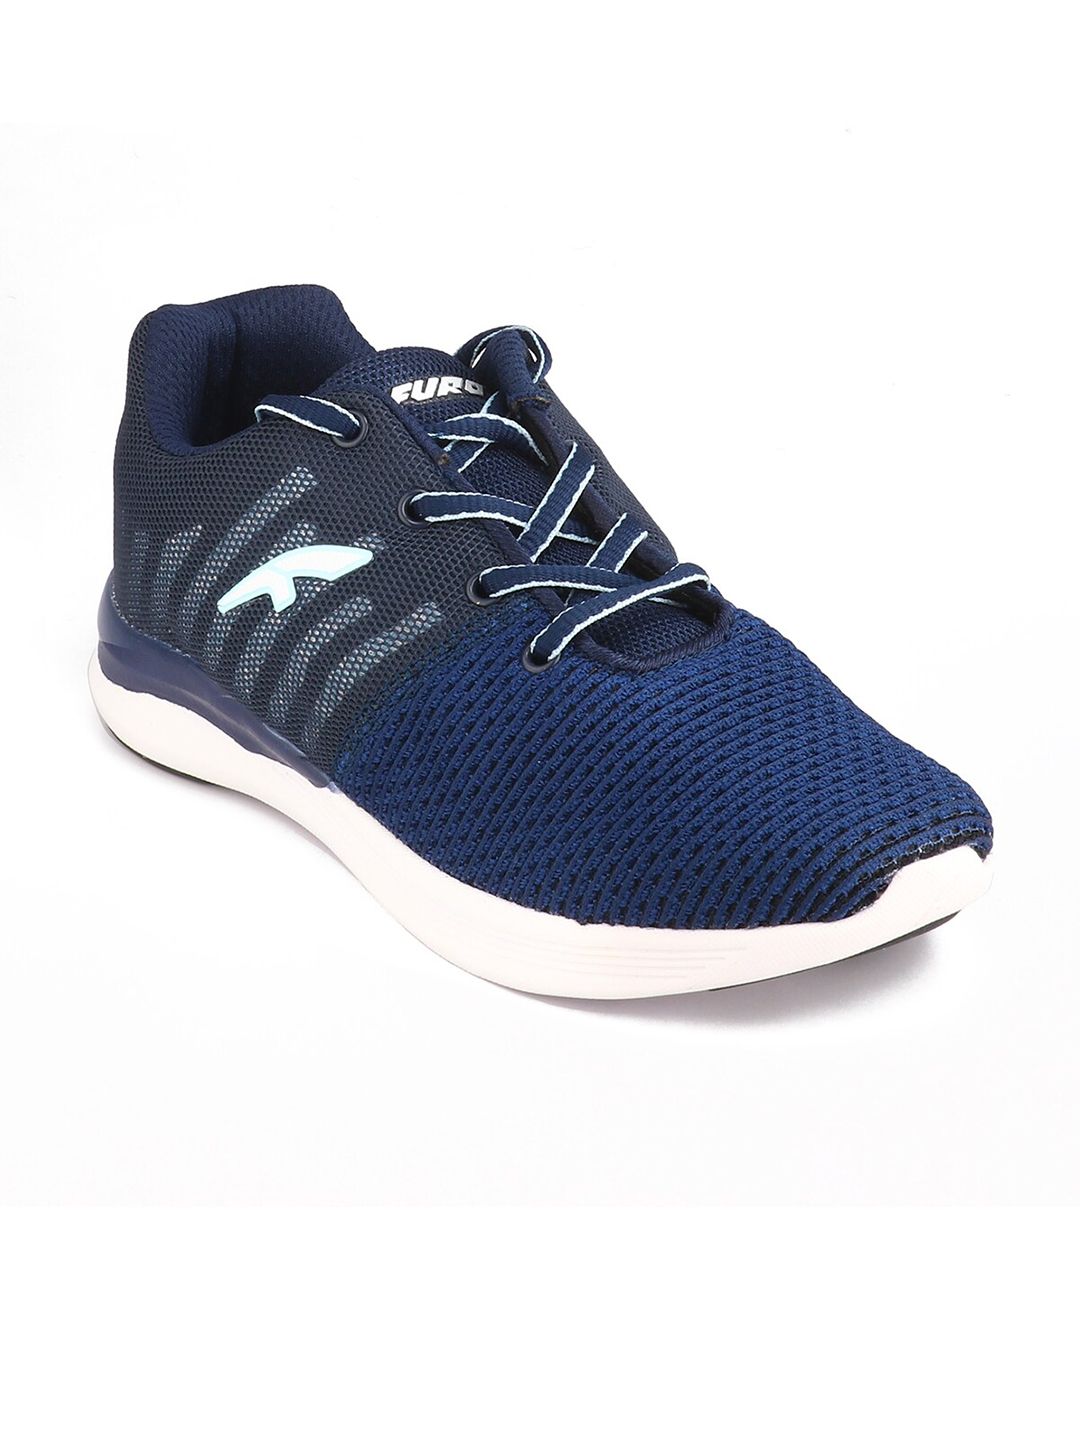 FURO by Red Chief Women Blue Mesh Air Max Running Shoes Price in India